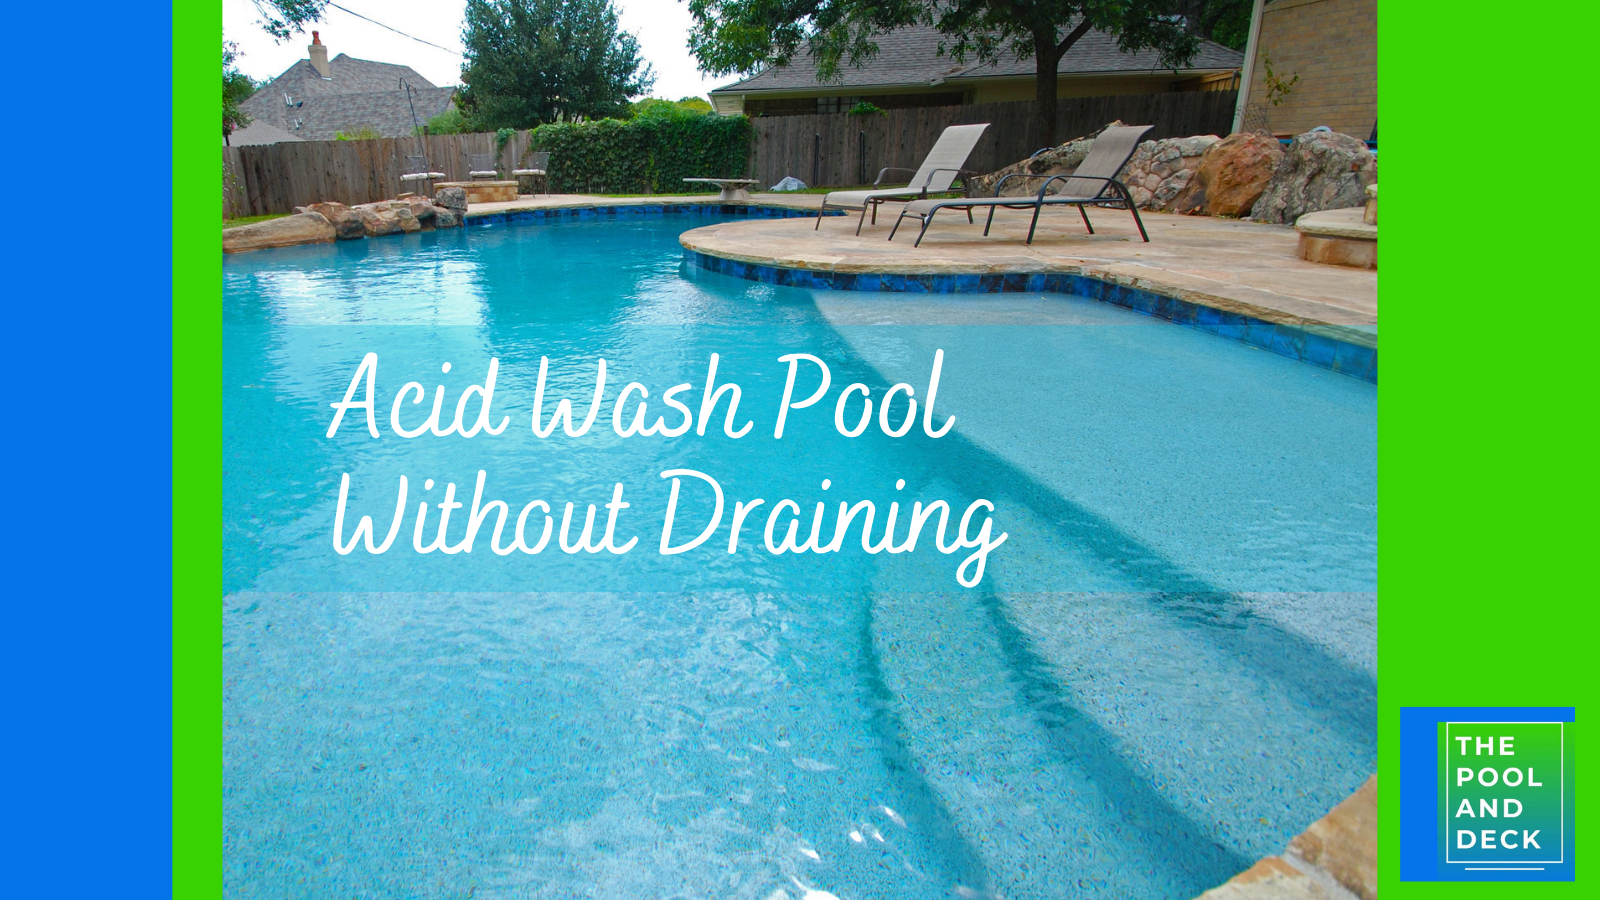 Acid Wash Pool Without Draining: DIY Guide